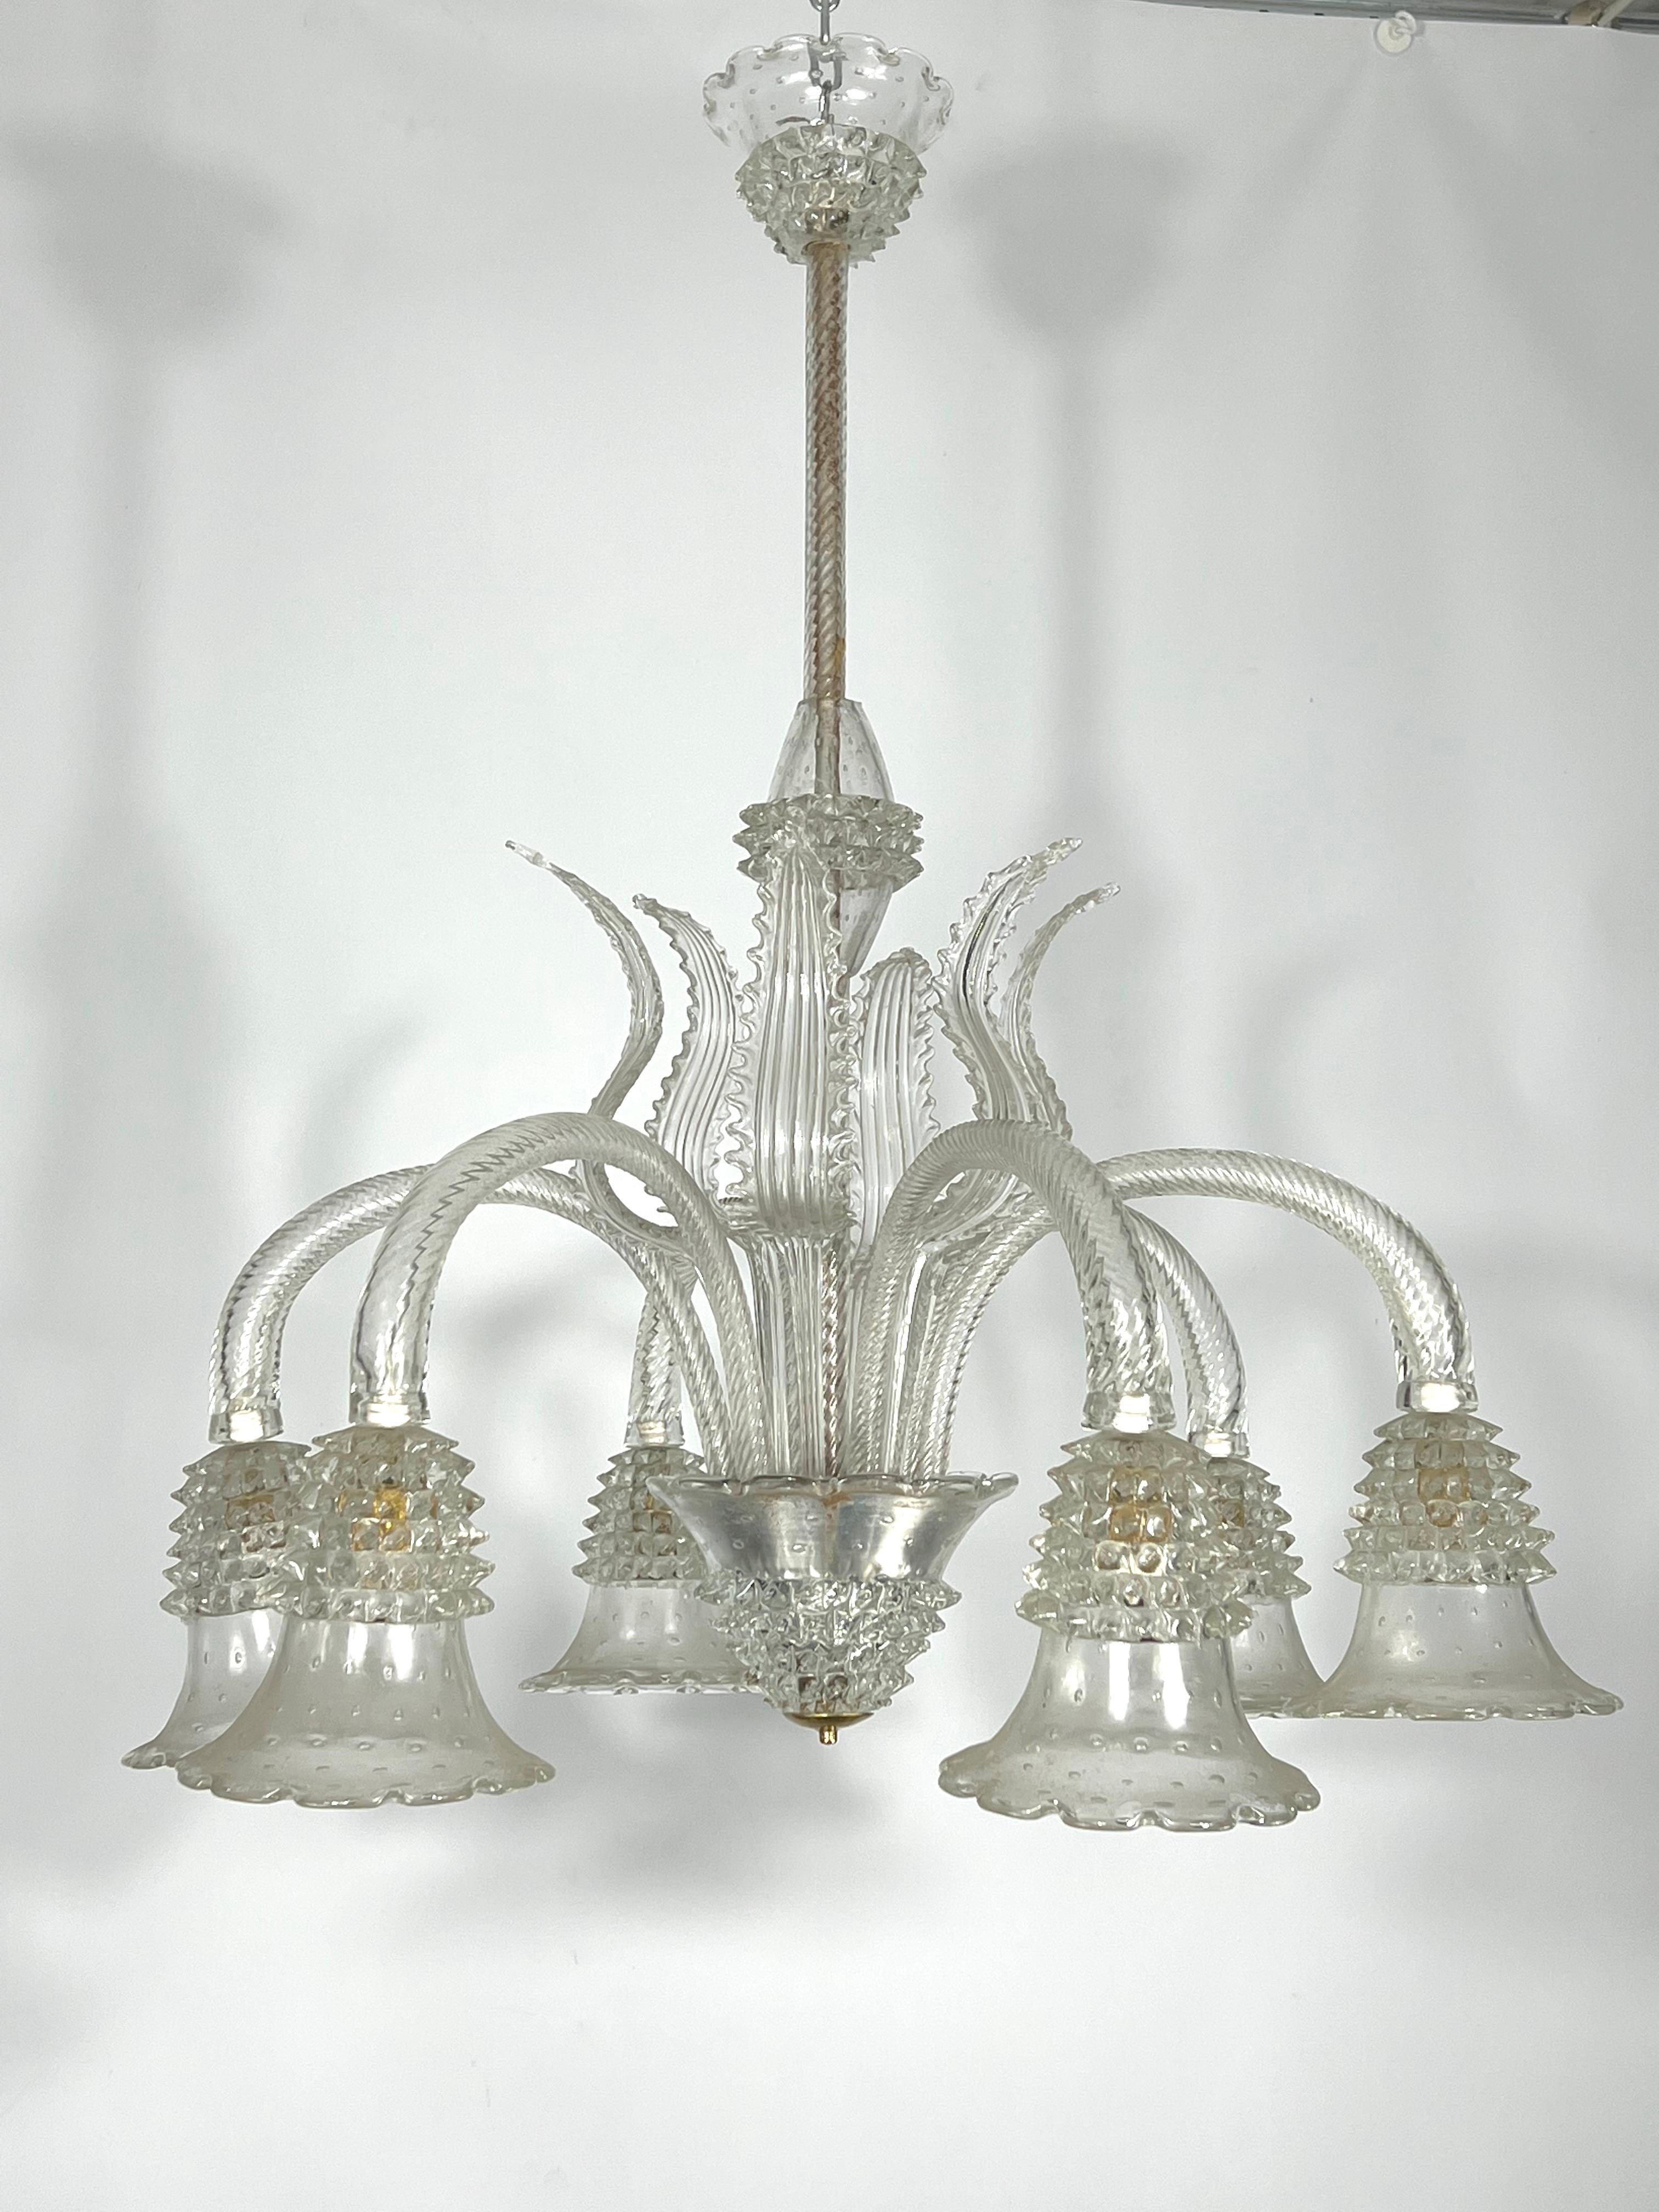 Great vintage condition with normal trace of age and use for this six arms chandelier produced by Ercole Barovier during the 30s and made from bullicante rostrato murano glass. No chips or cracks. Full working with EU standard, adaptable on demand